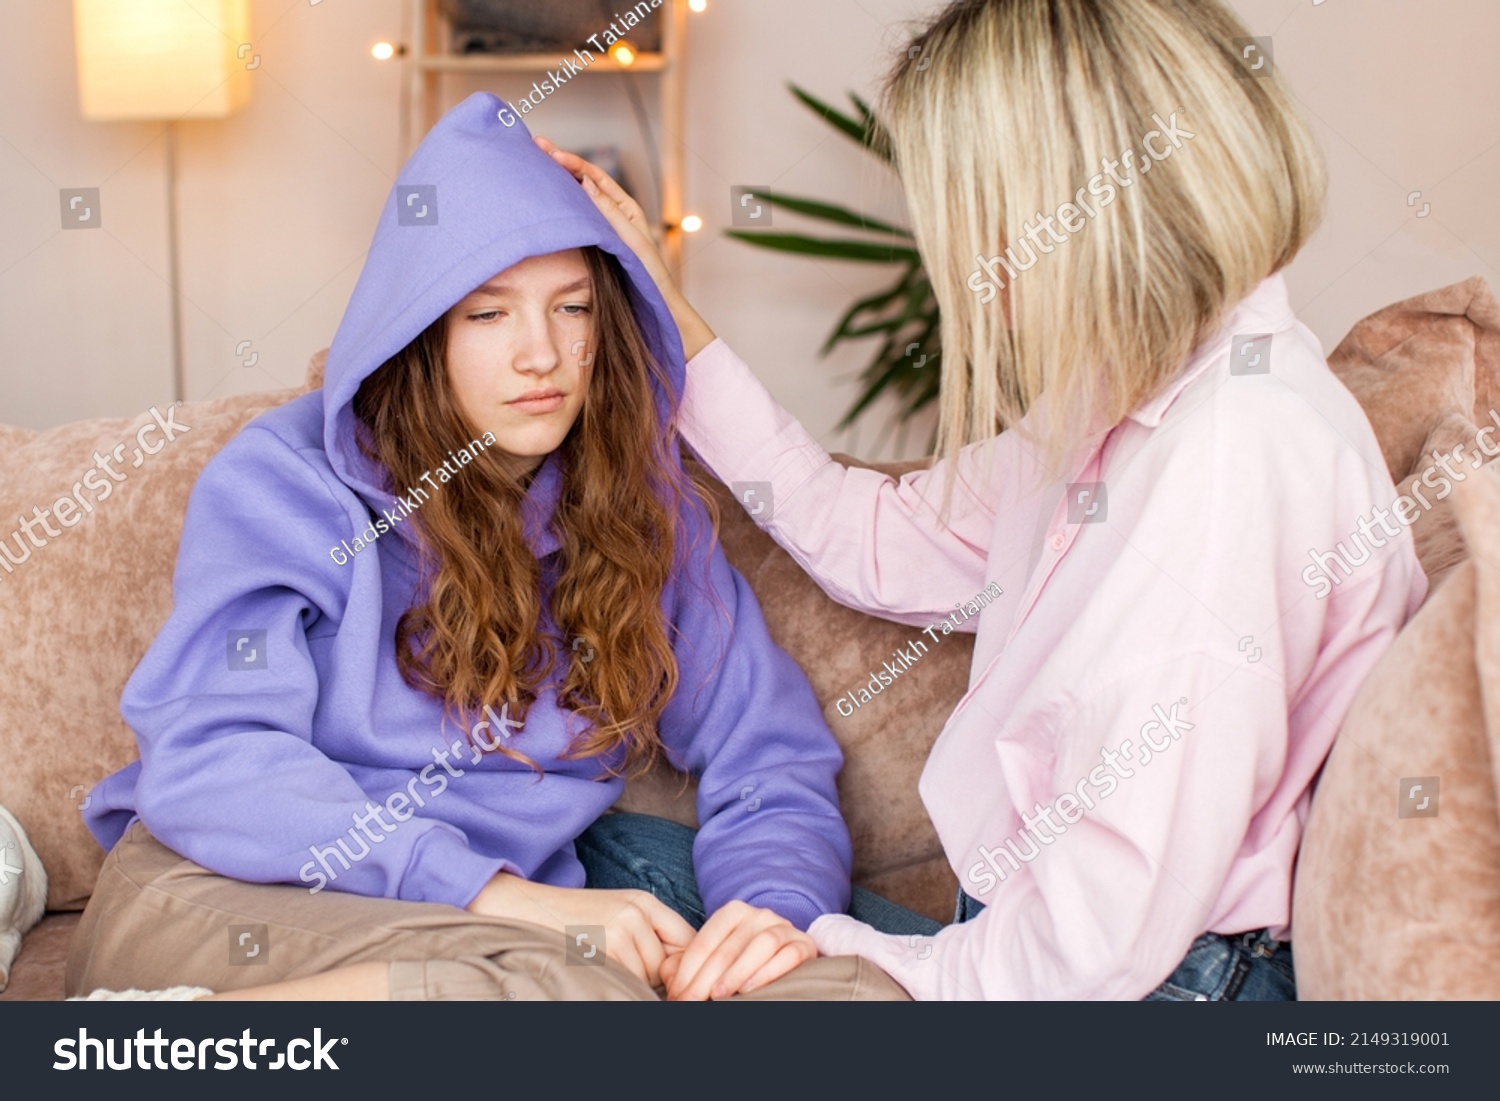 Caring Caucasian mother talk comfort unhappy sad teenage daughter suffering from school bullying or psychological problems, loving mom support make peace with depressed introvert teen girl child #2149319001